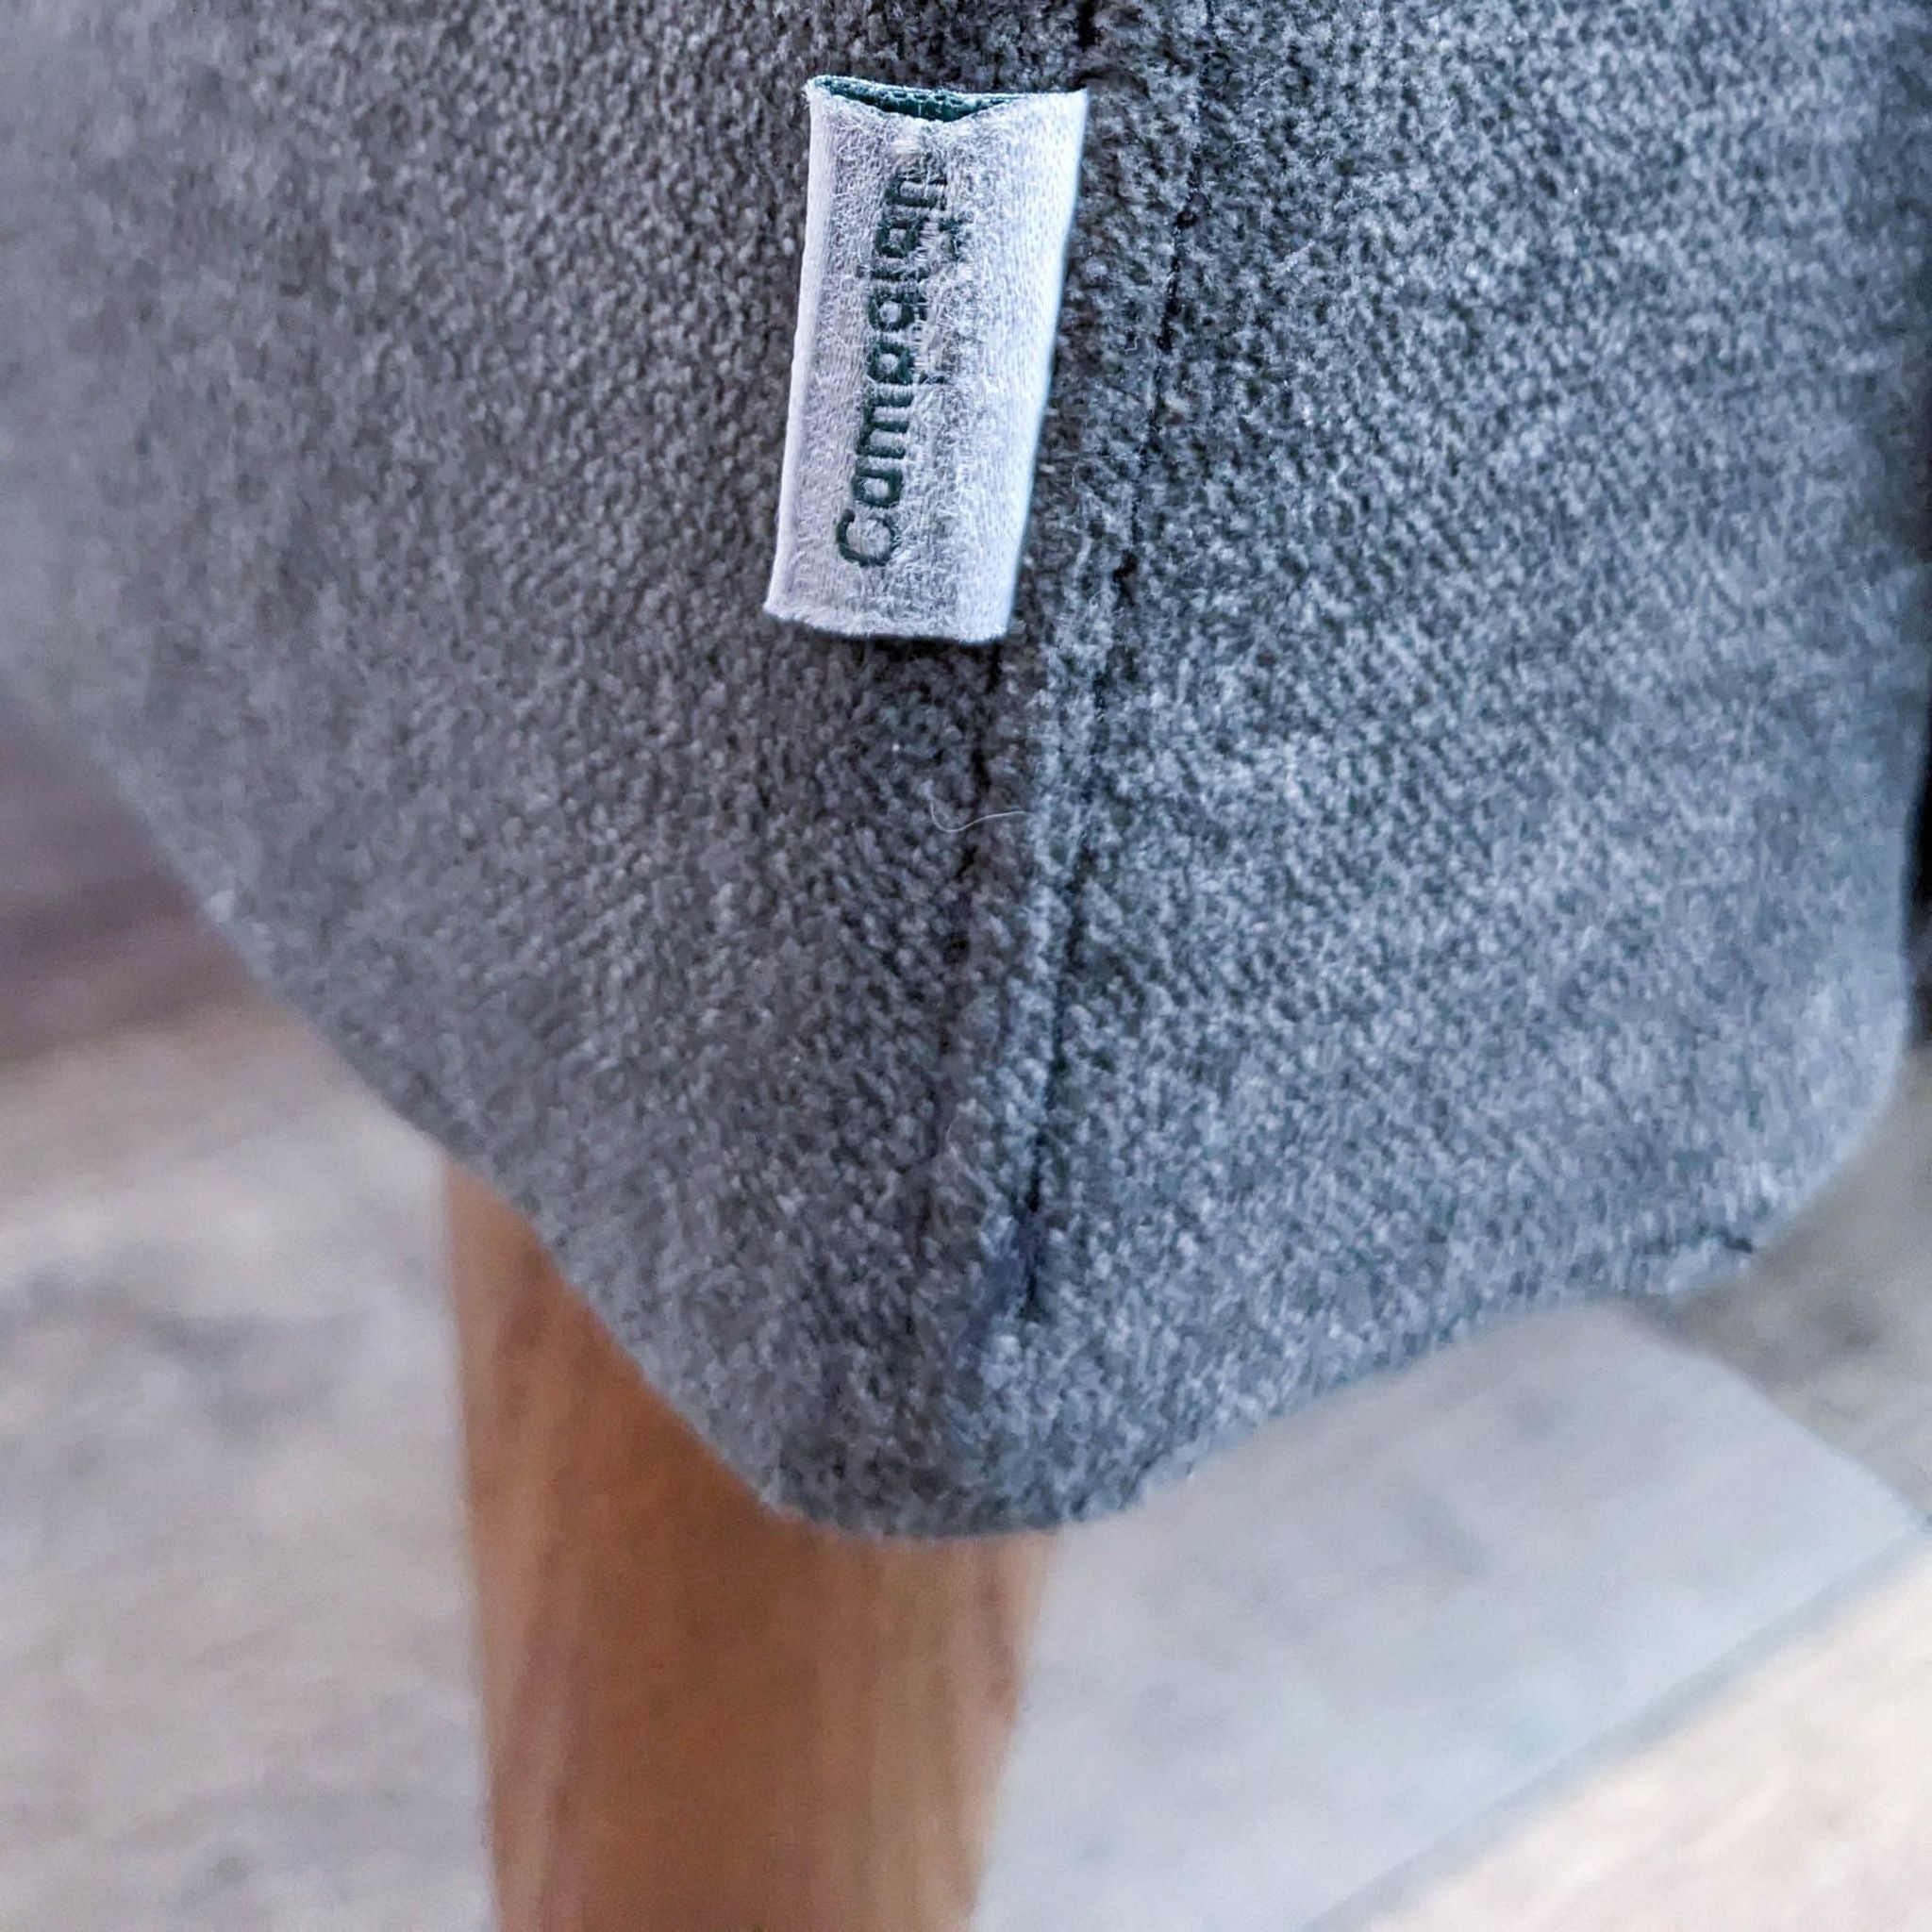 3. Close-up of a gray upholstered Reperch sofa's leg, featuring a clean design with a visible brand label on the side.